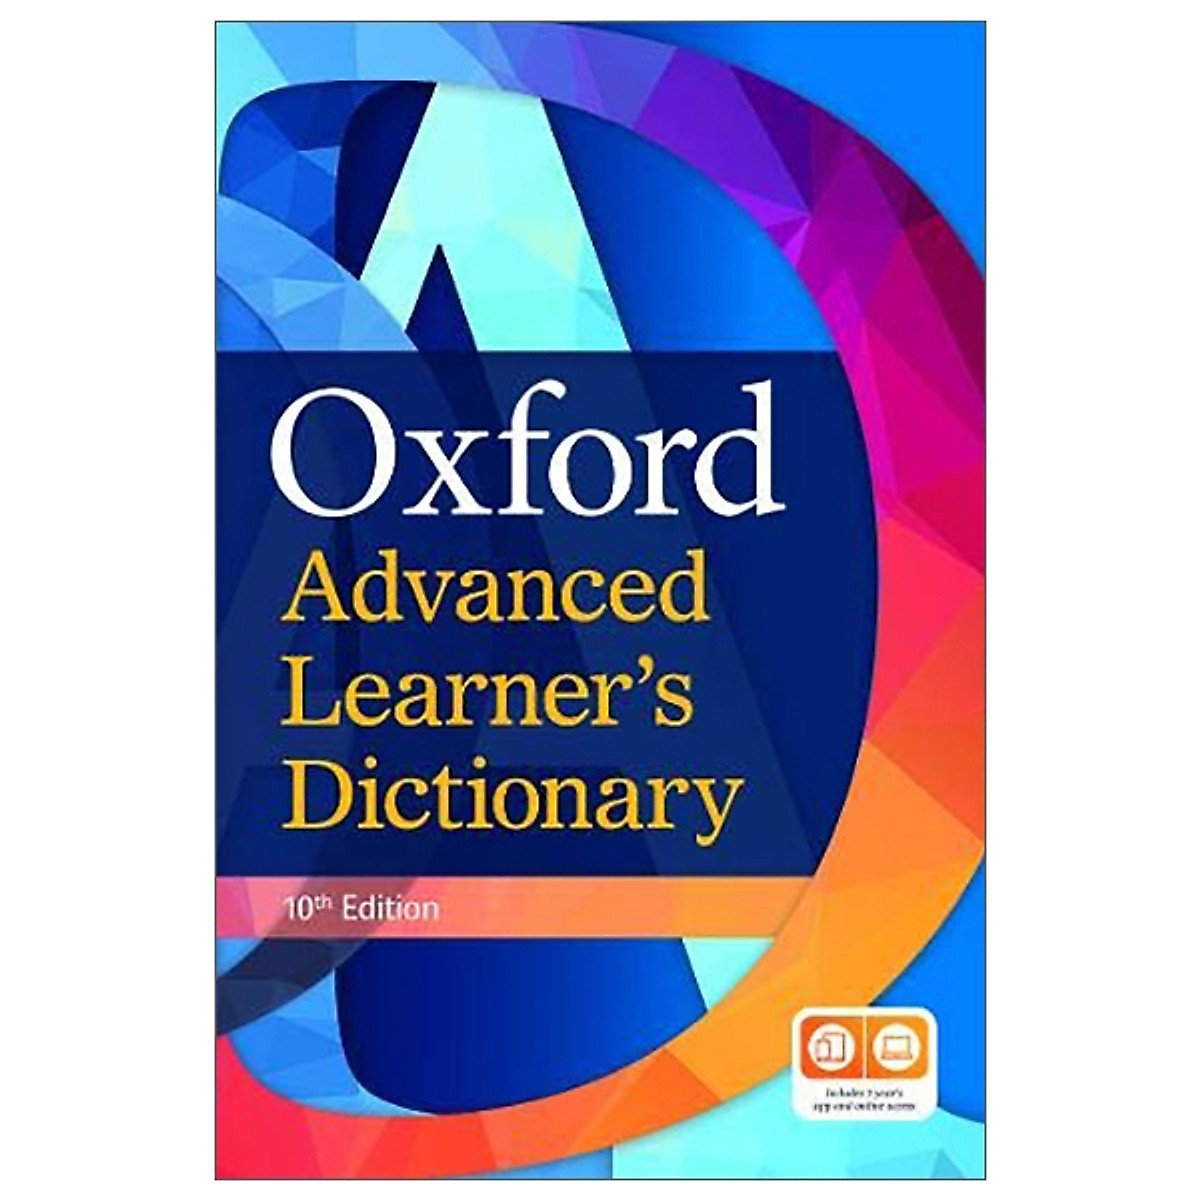 Oxford Advanced Learner's Dictionary : Paperback - 10th Edition (With 1 Year's Access To Both Premium Online And App)